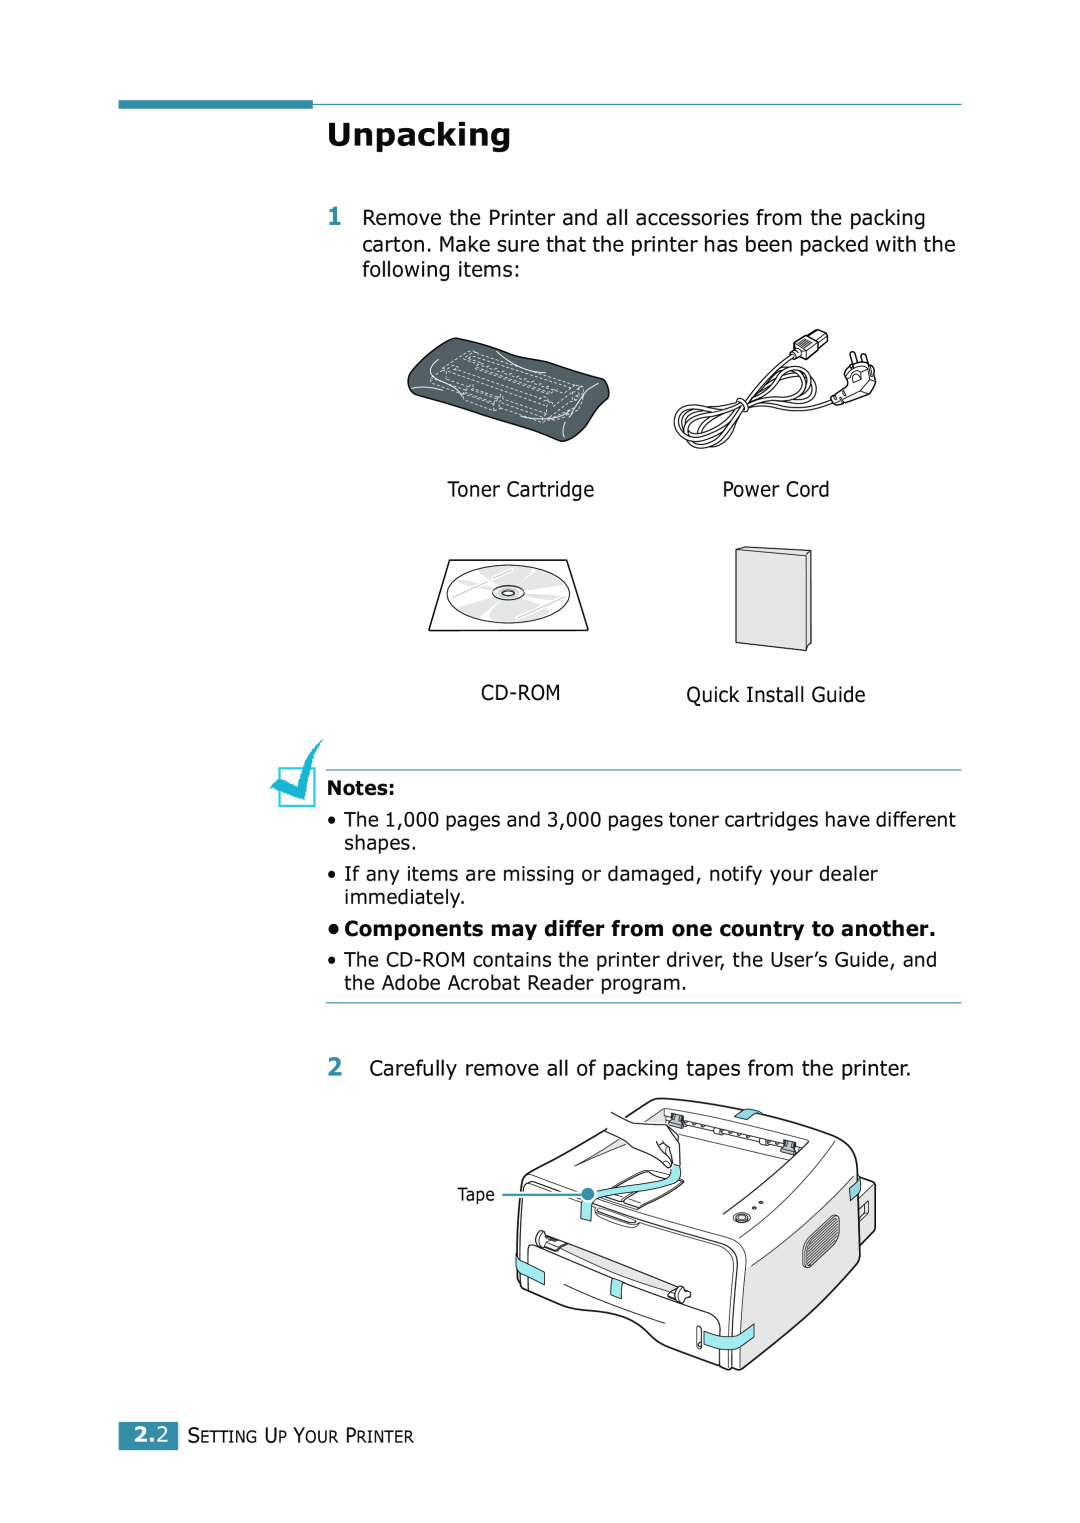 Samsung ML-1520 manual Unpacking, Components may differ from one country to another 